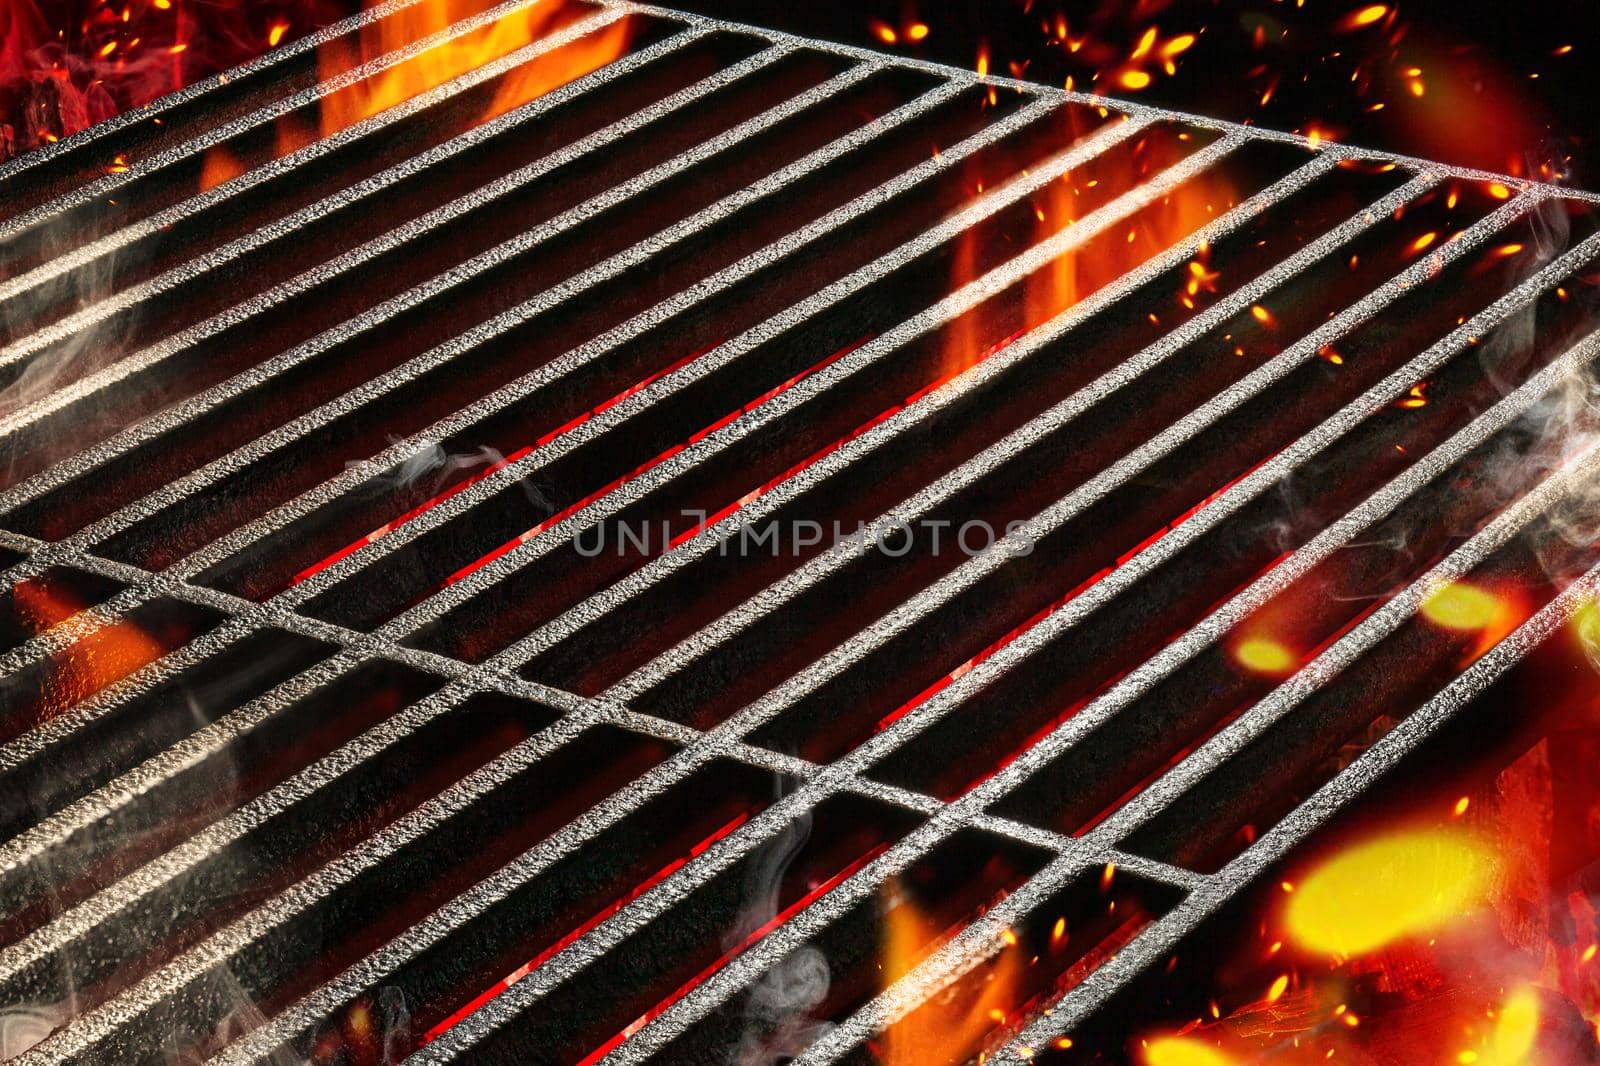 Hot empty portable summer barbecue BBQ grill with bright flaming fire and ember charcoal. Waiting for the placement of your food. Cookout concept. Close up